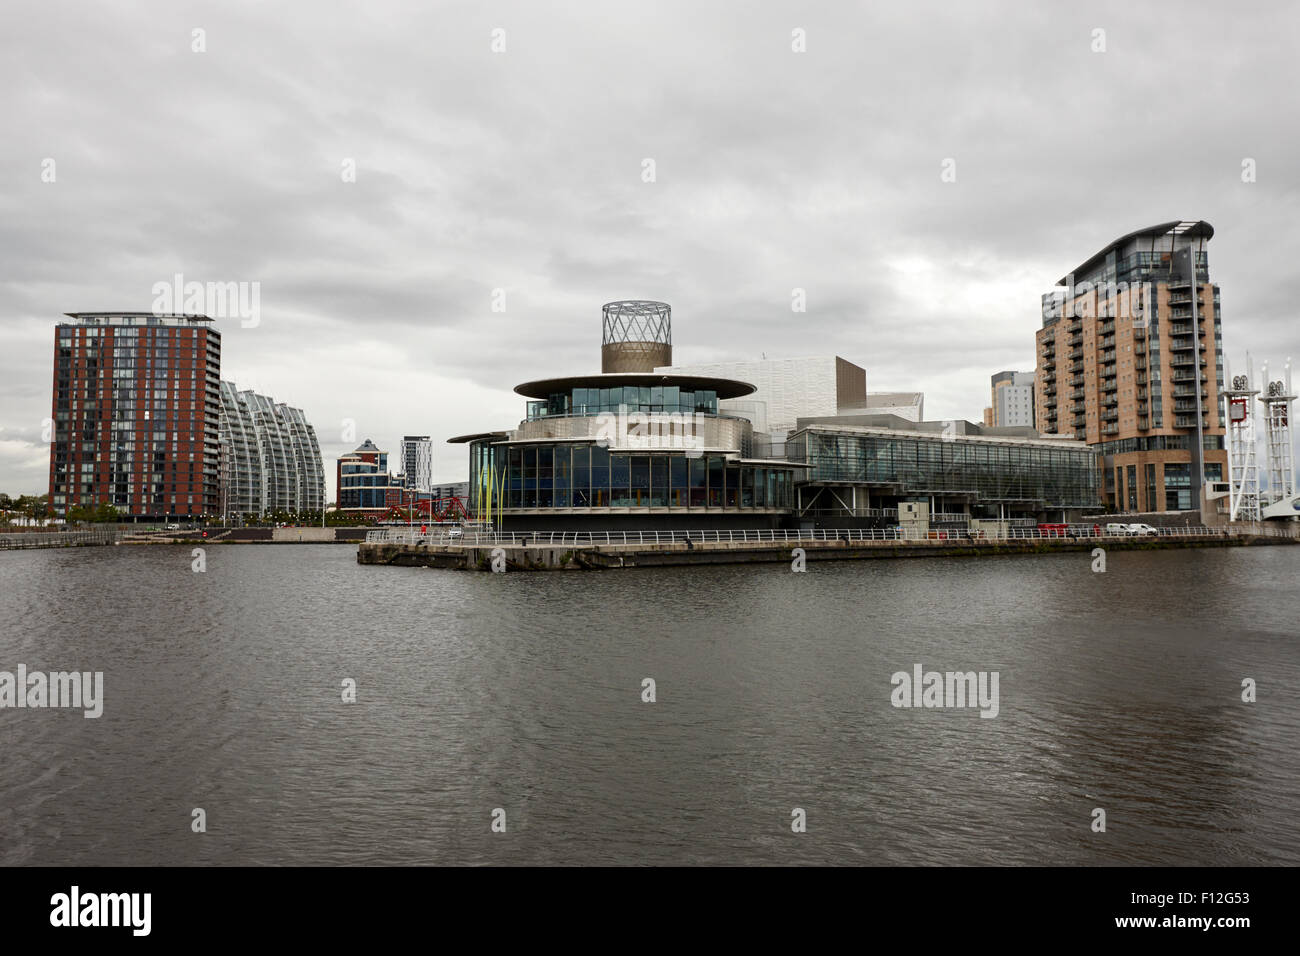 the lowry arts centre and salford quays Manchester uk Stock Photo